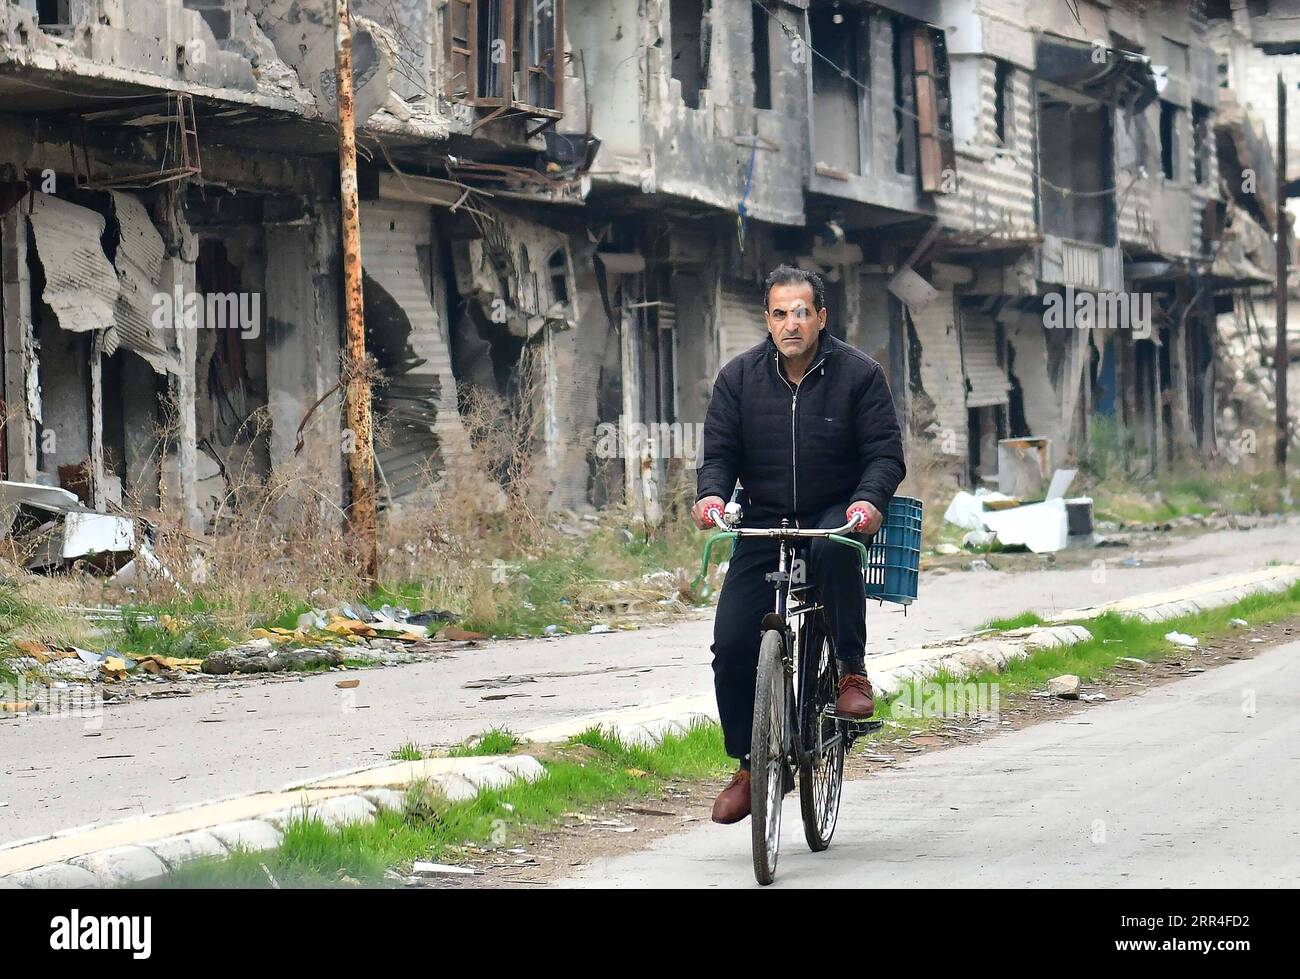 201203 -- DAMASCUS, Dec. 3, 2020 -- A man rides his bicycle in the Yarmouk Camp area, south of the capital Damascus, Syria, on Nov. 27, 2020. With mixed feelings of happiness and sadness, Jamal Hammad entered the war-ravaged Yarmouk Camp for Palestinian refugees, south of Damascus, to start a journey of returning to his old life that was scarred by the prolonged war in Syria. The 58-year-old humanitarian worker was among the first to enter the Yarmouk Camp. He climbed over the rubble and debris to reach his house, overwhelmed by the happiness of return, as well as sadness and anger about the d Stock Photo